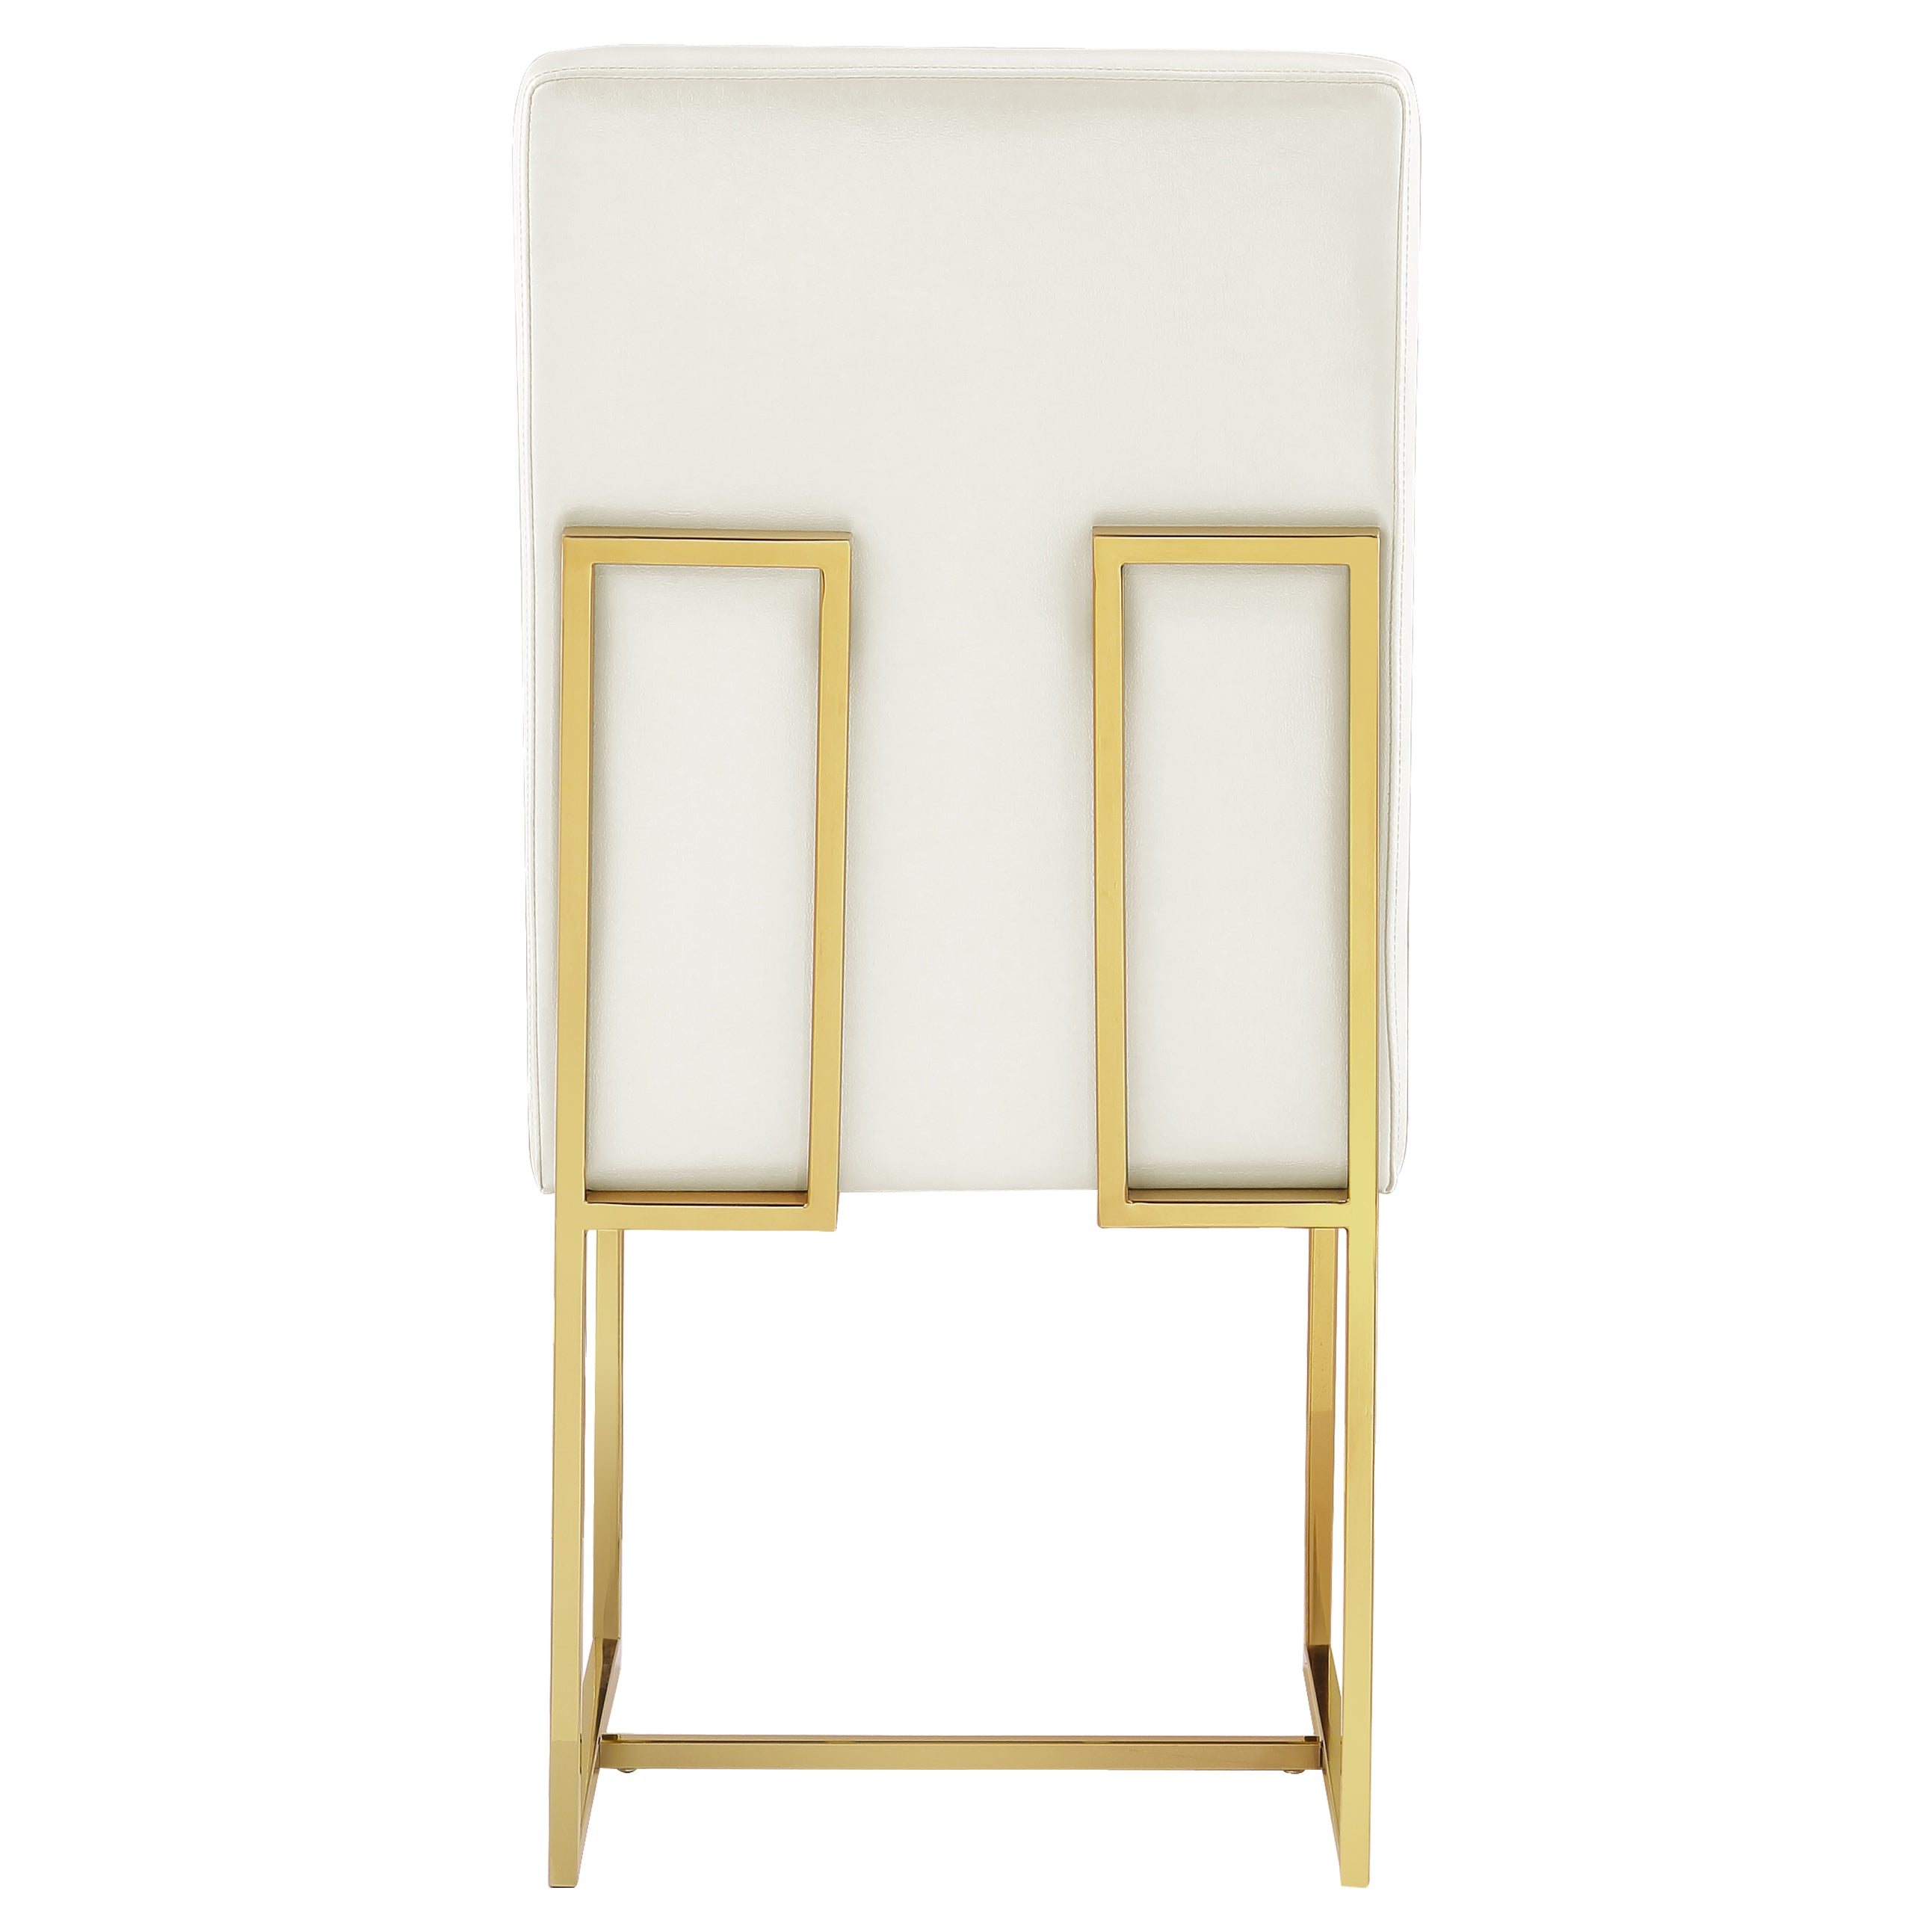 White leather Dining Chairs |Square backrest| Metal sled base | C146